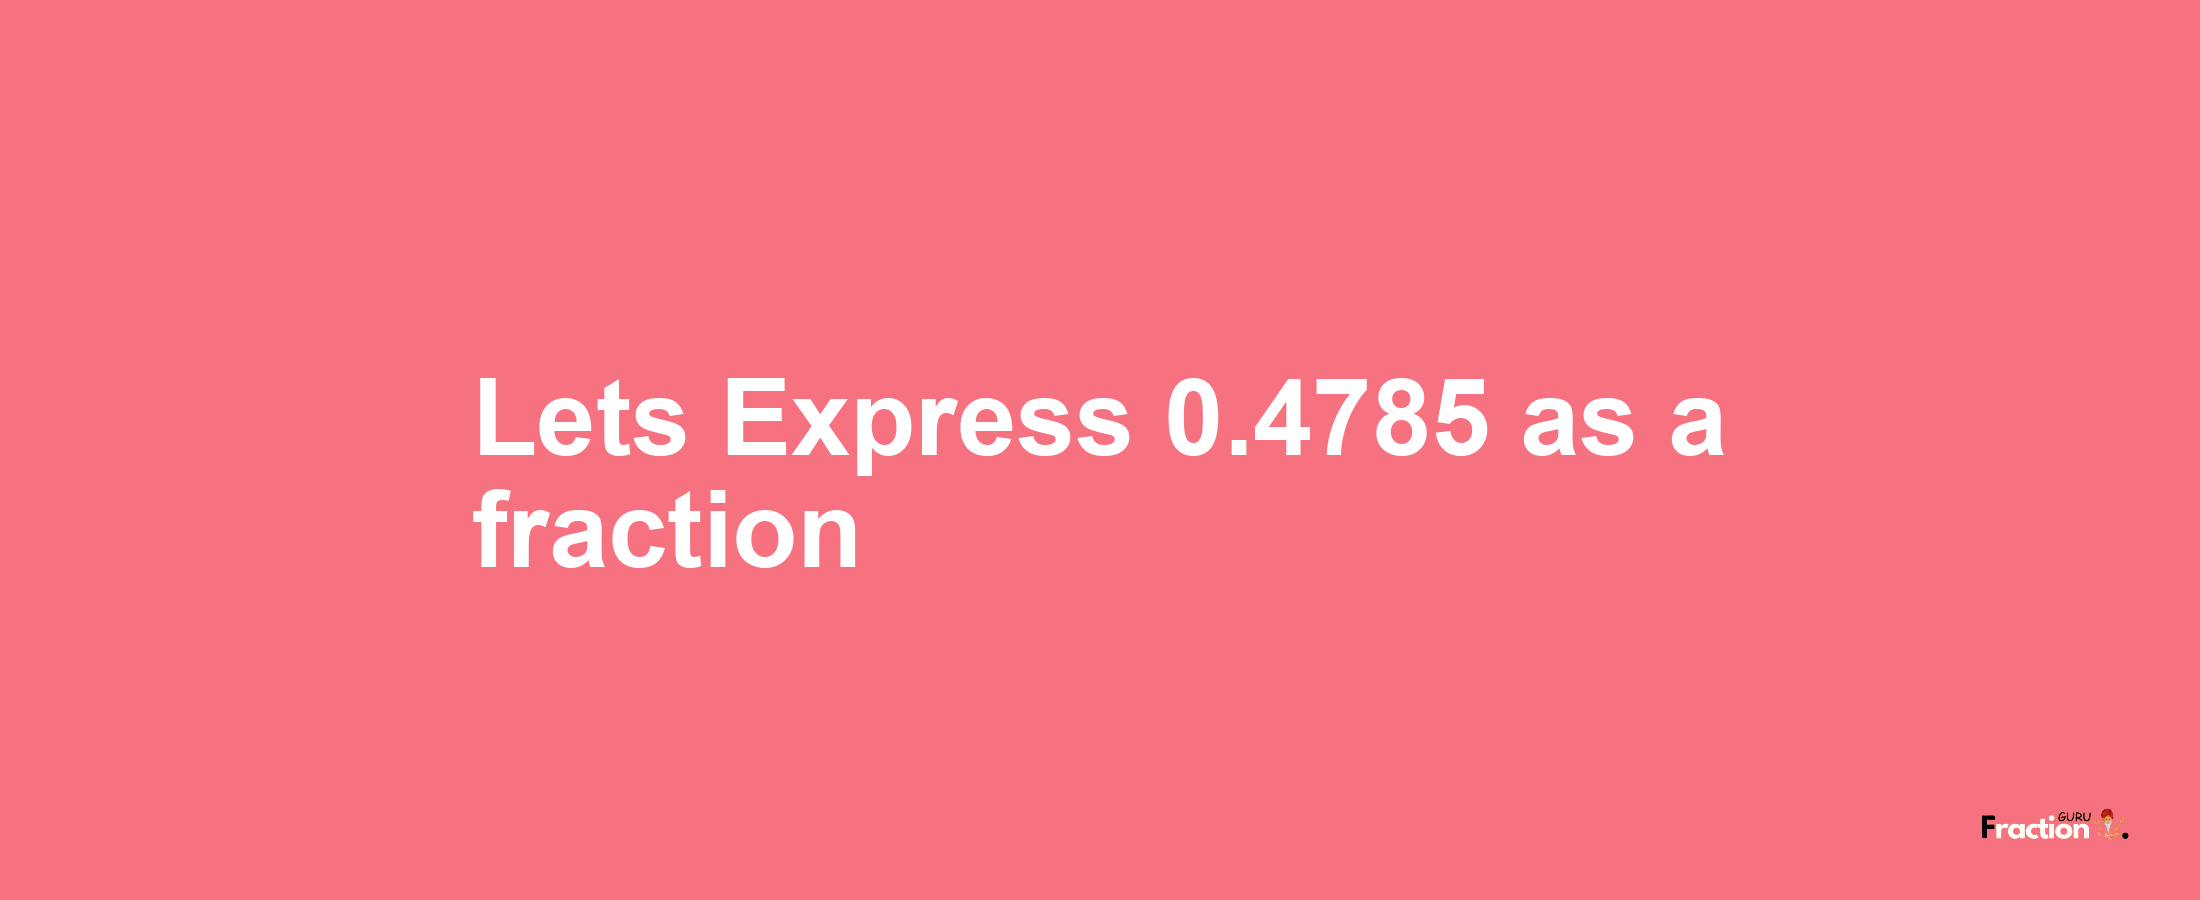 Lets Express 0.4785 as afraction